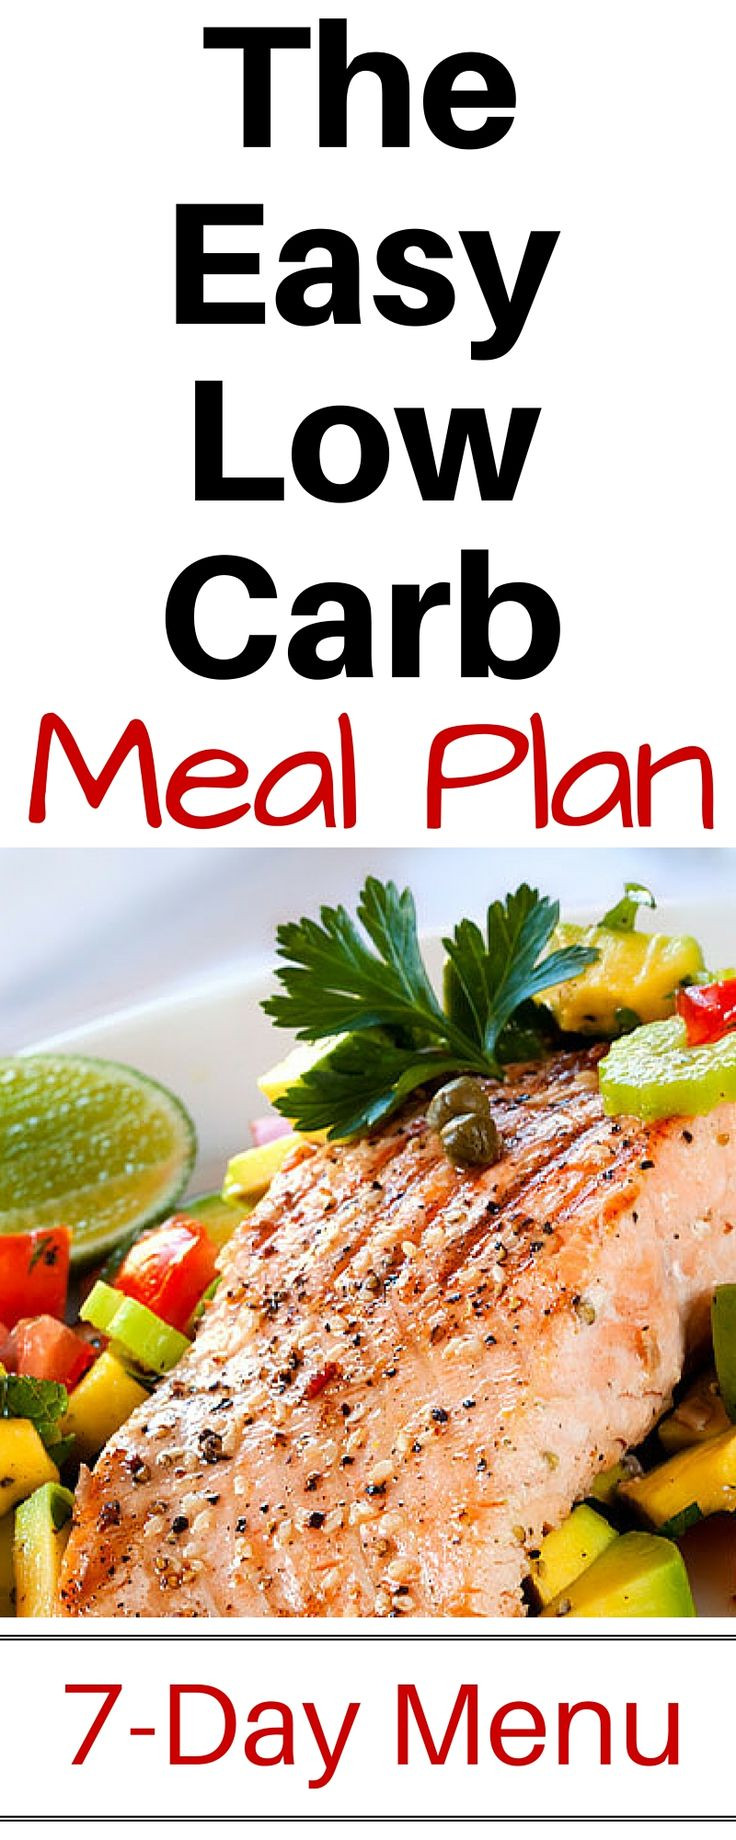 Low Carb Diet Recipes Meal Plan 7 Days
 Best 25 Low carb meal plan ideas on Pinterest